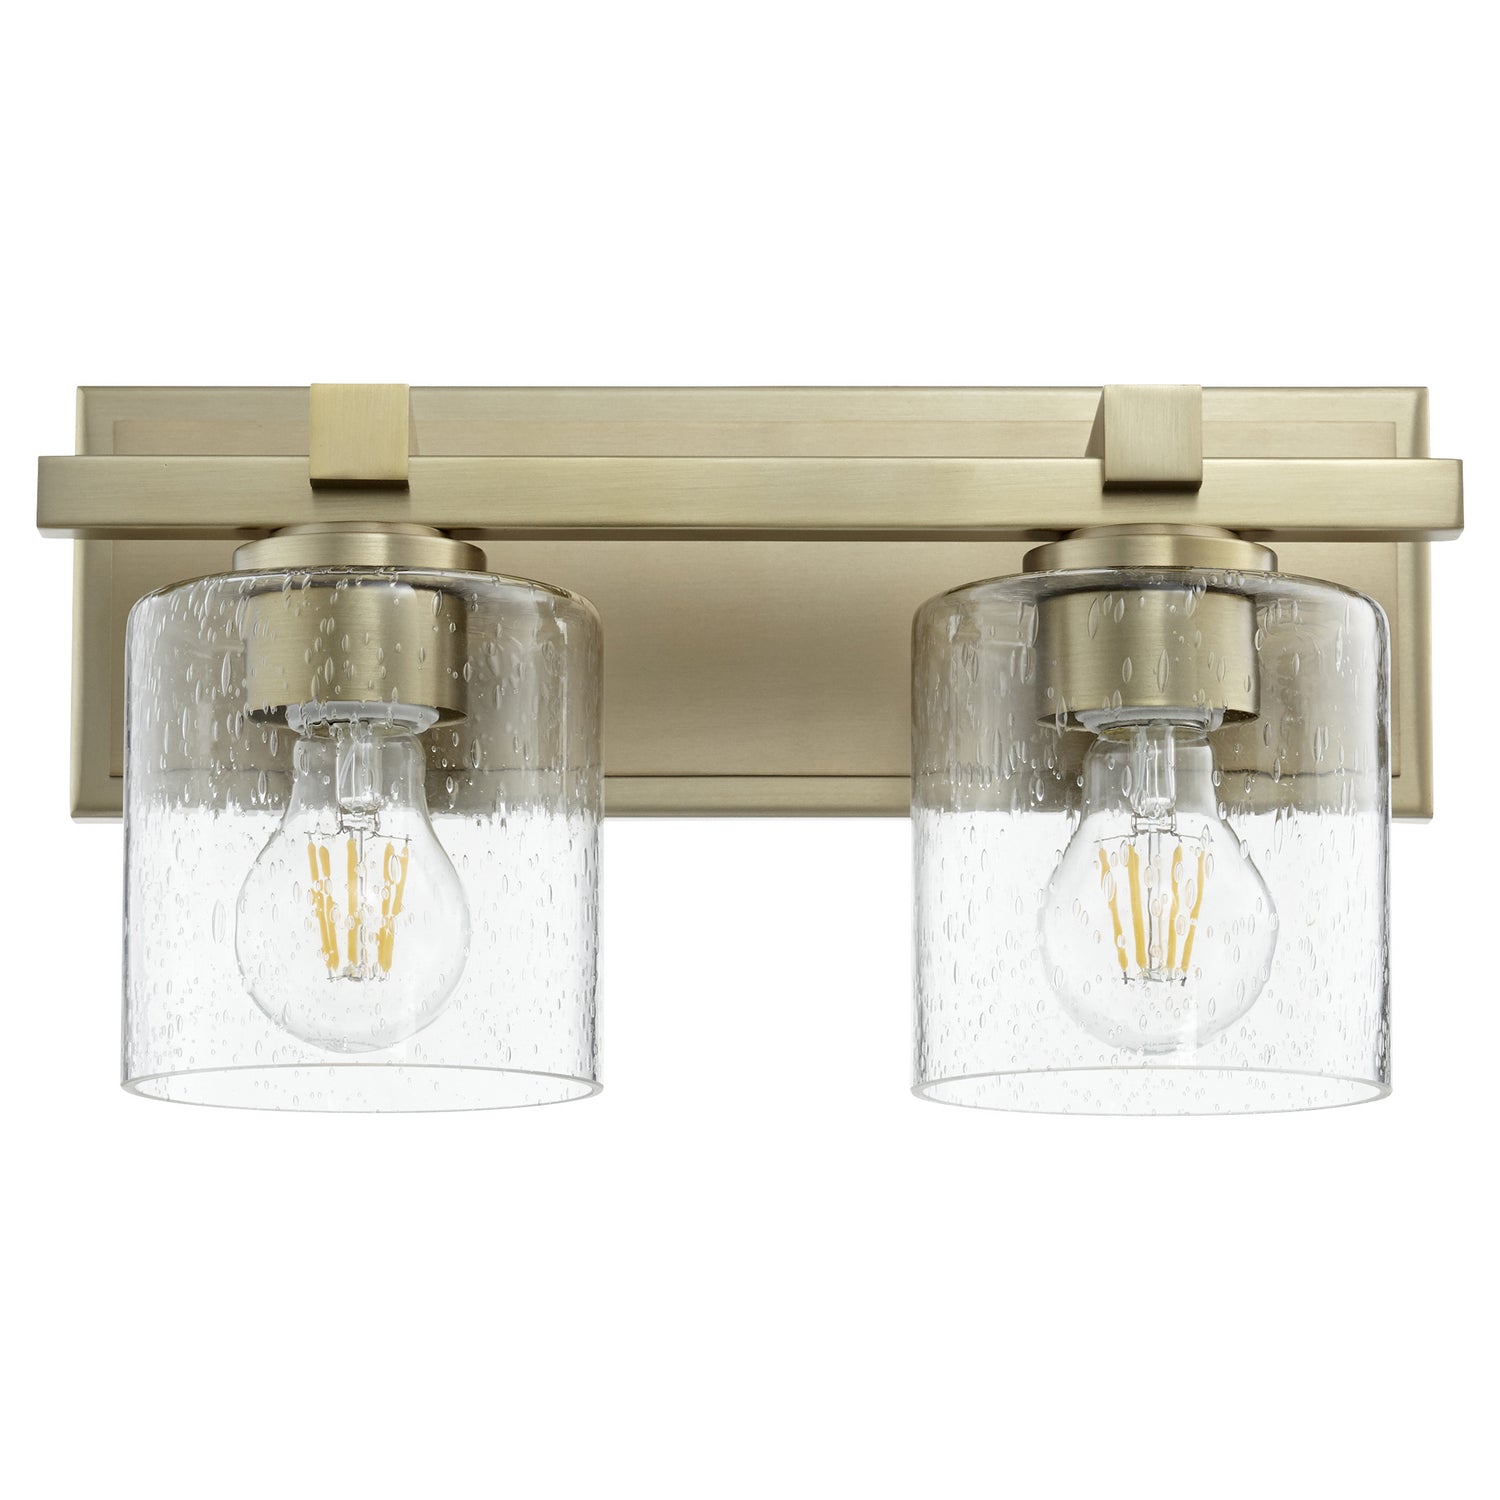 Quorum - 5669-2-280 - Two Light Wall Mount - 5669 Cylinder Lighting Series - Aged Brass w/ Clear/Seeded